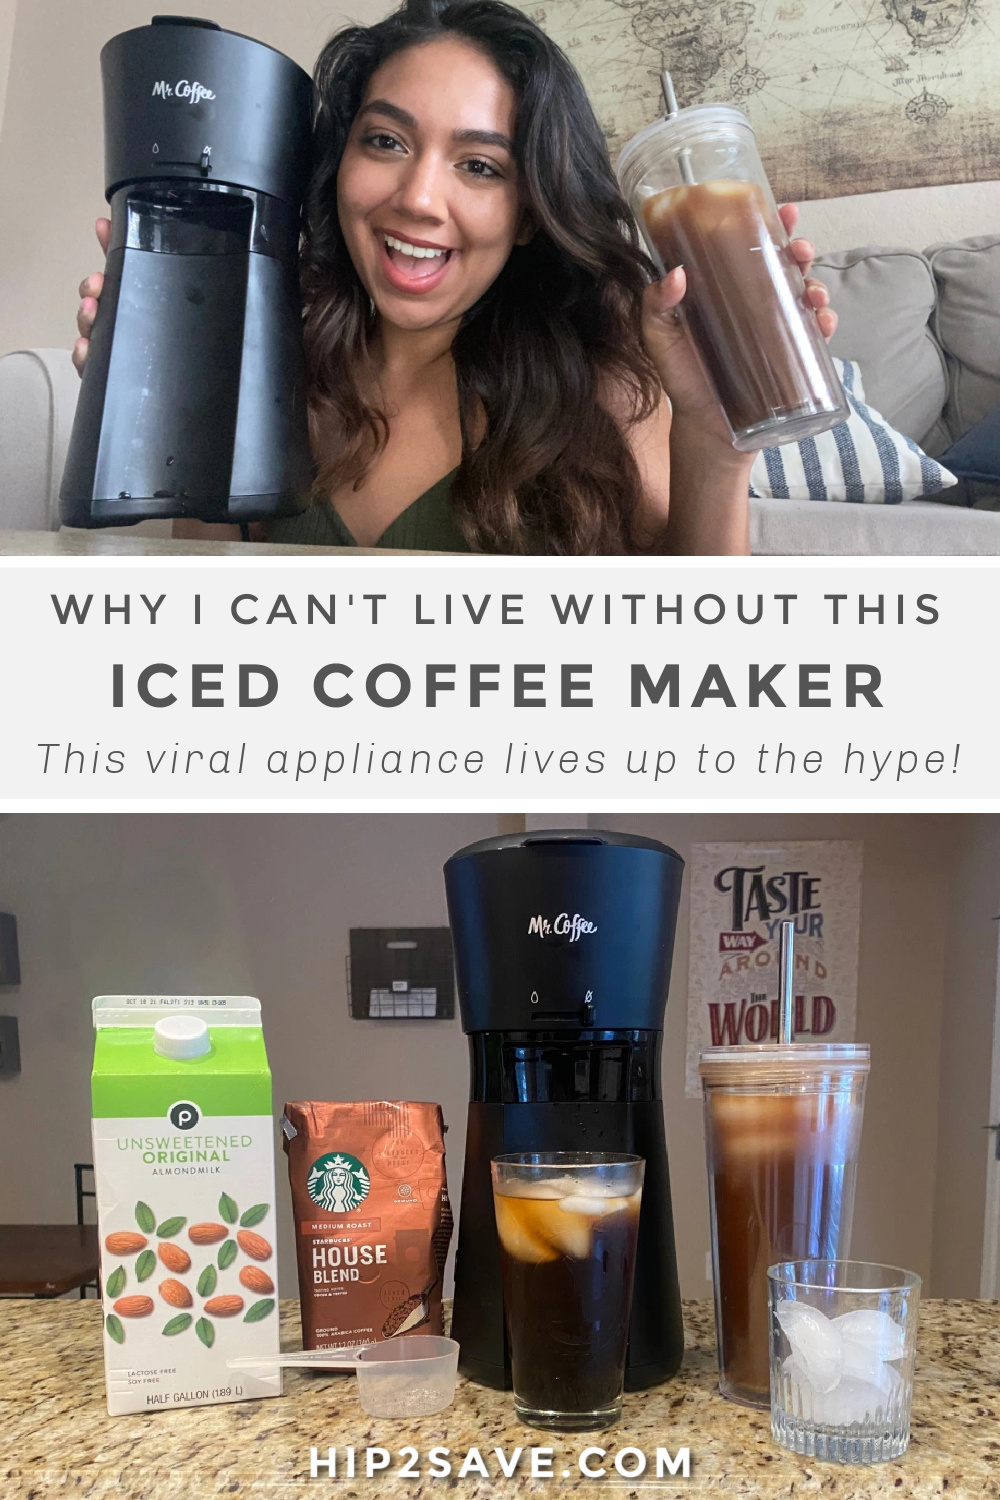 https://hip2save.com/wp-content/uploads/2022/04/mr-coffee-iced-coffee-maker-pinterest.jpg?fit=1000%2C1500&strip=all